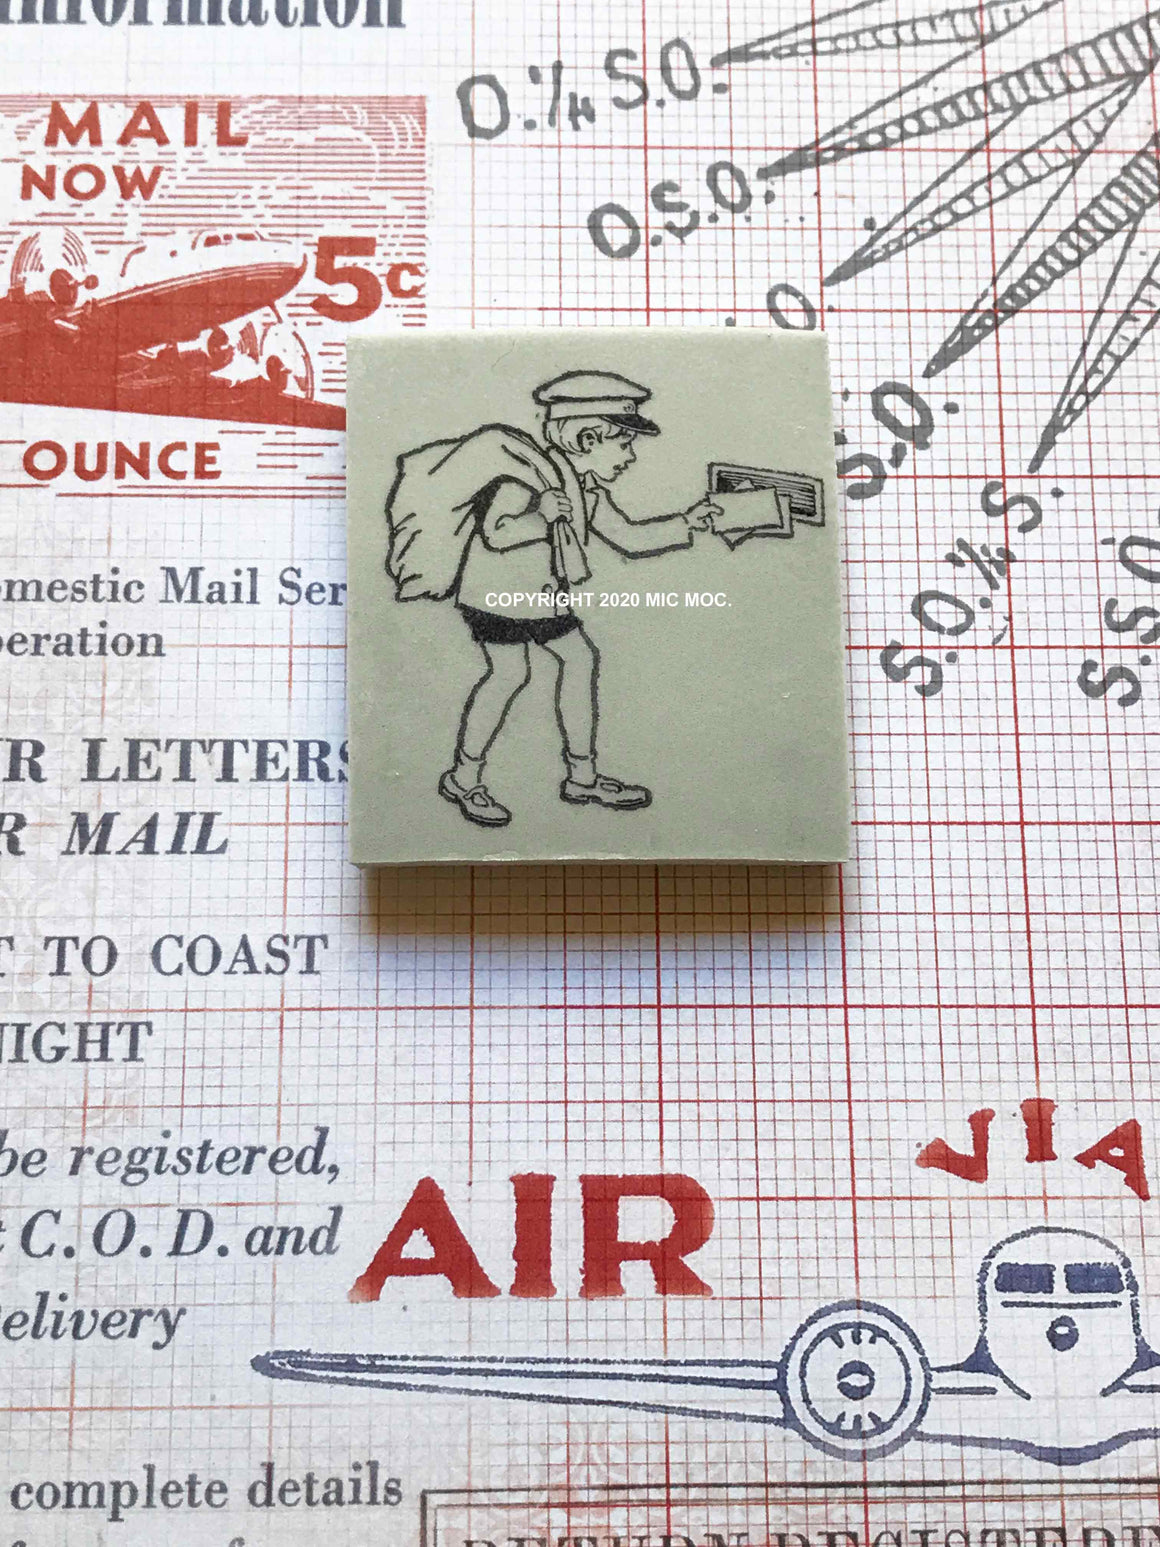 'Little Post' Rubber Stamp by Mic Moc from micmoc.com